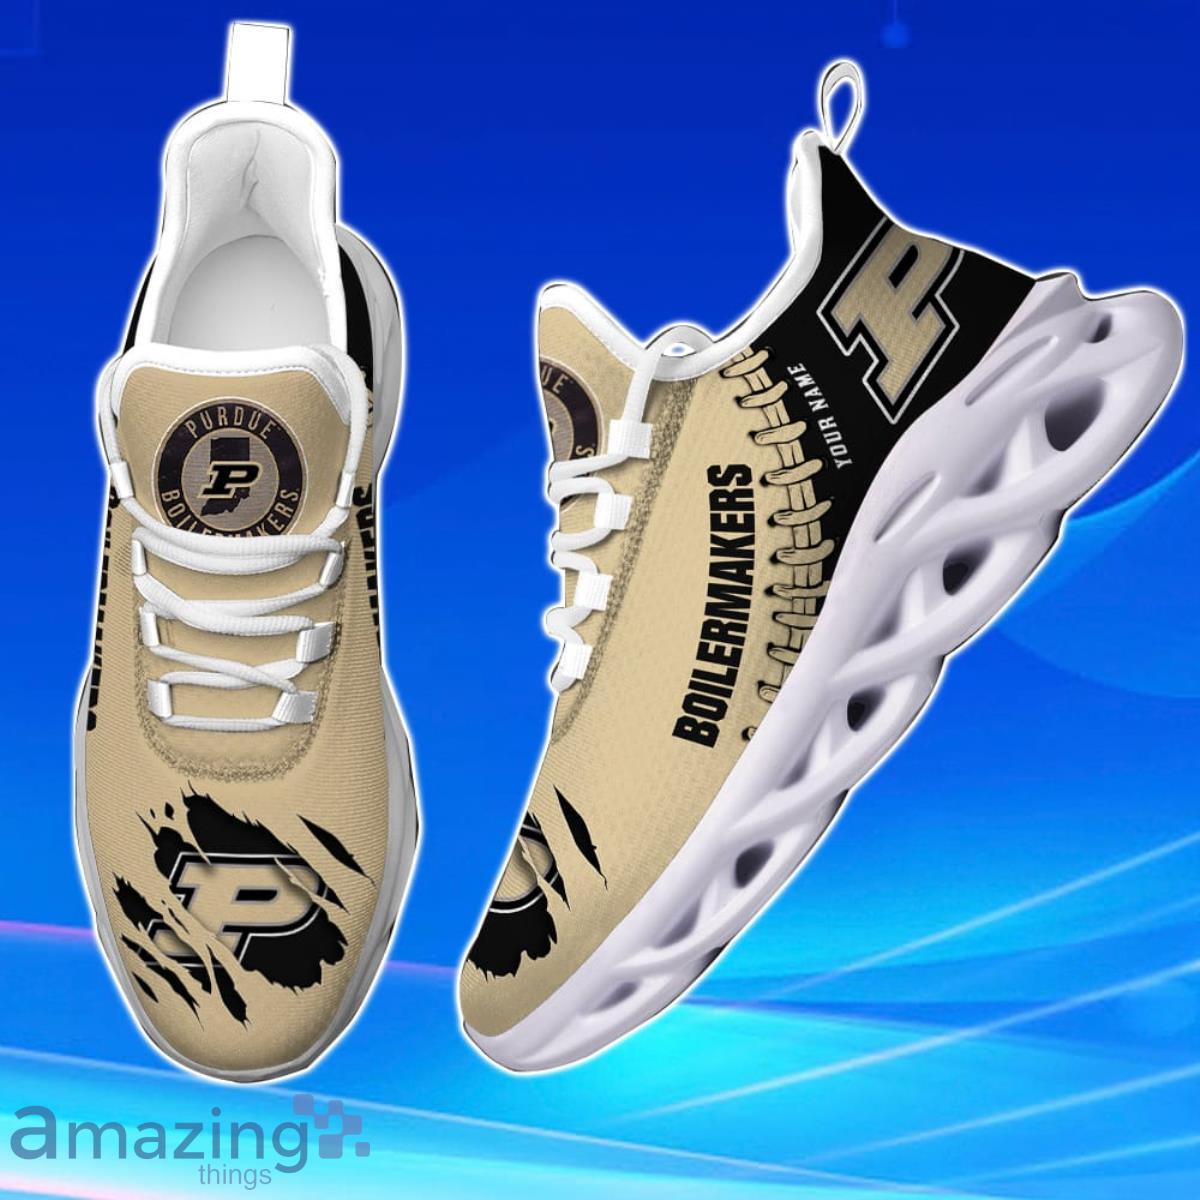 Purdue Boilermakers Personalized Max Soul Shoes Unique Gift For Men And Women Fans Product Photo 2